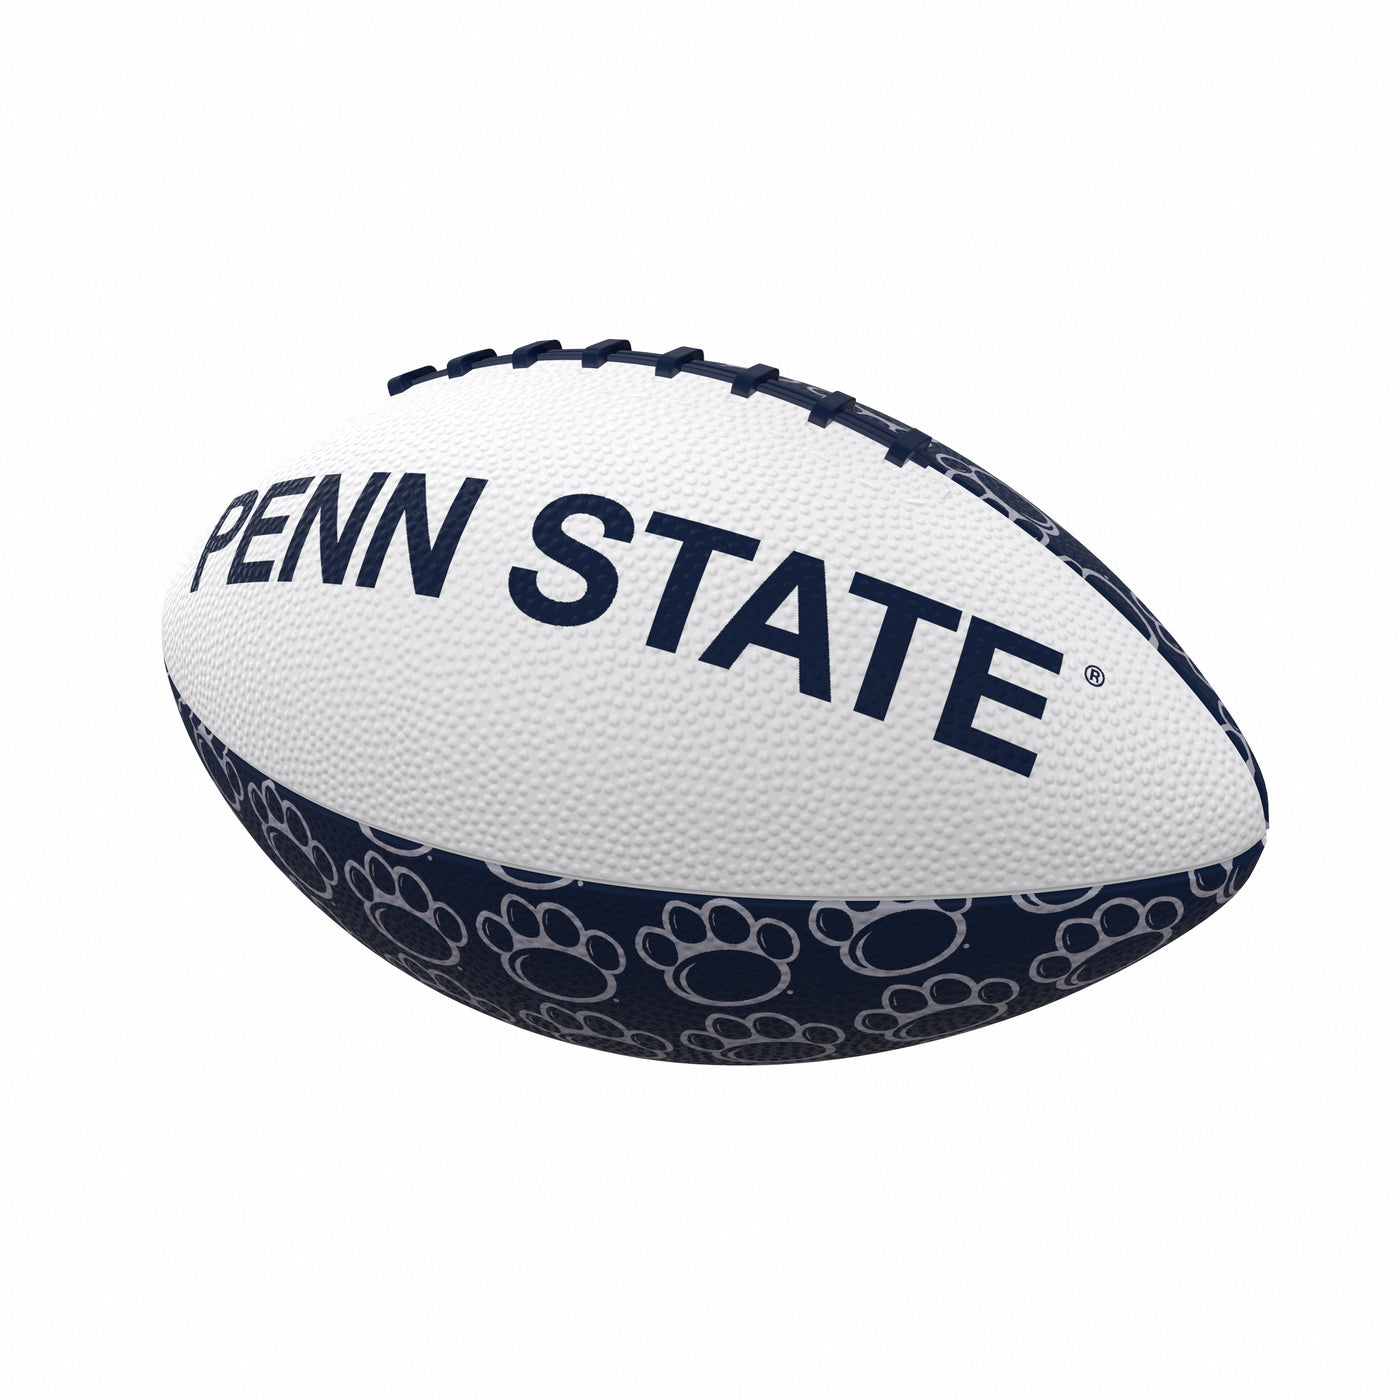 Penn State Repeating Mini-Size Rubber Football